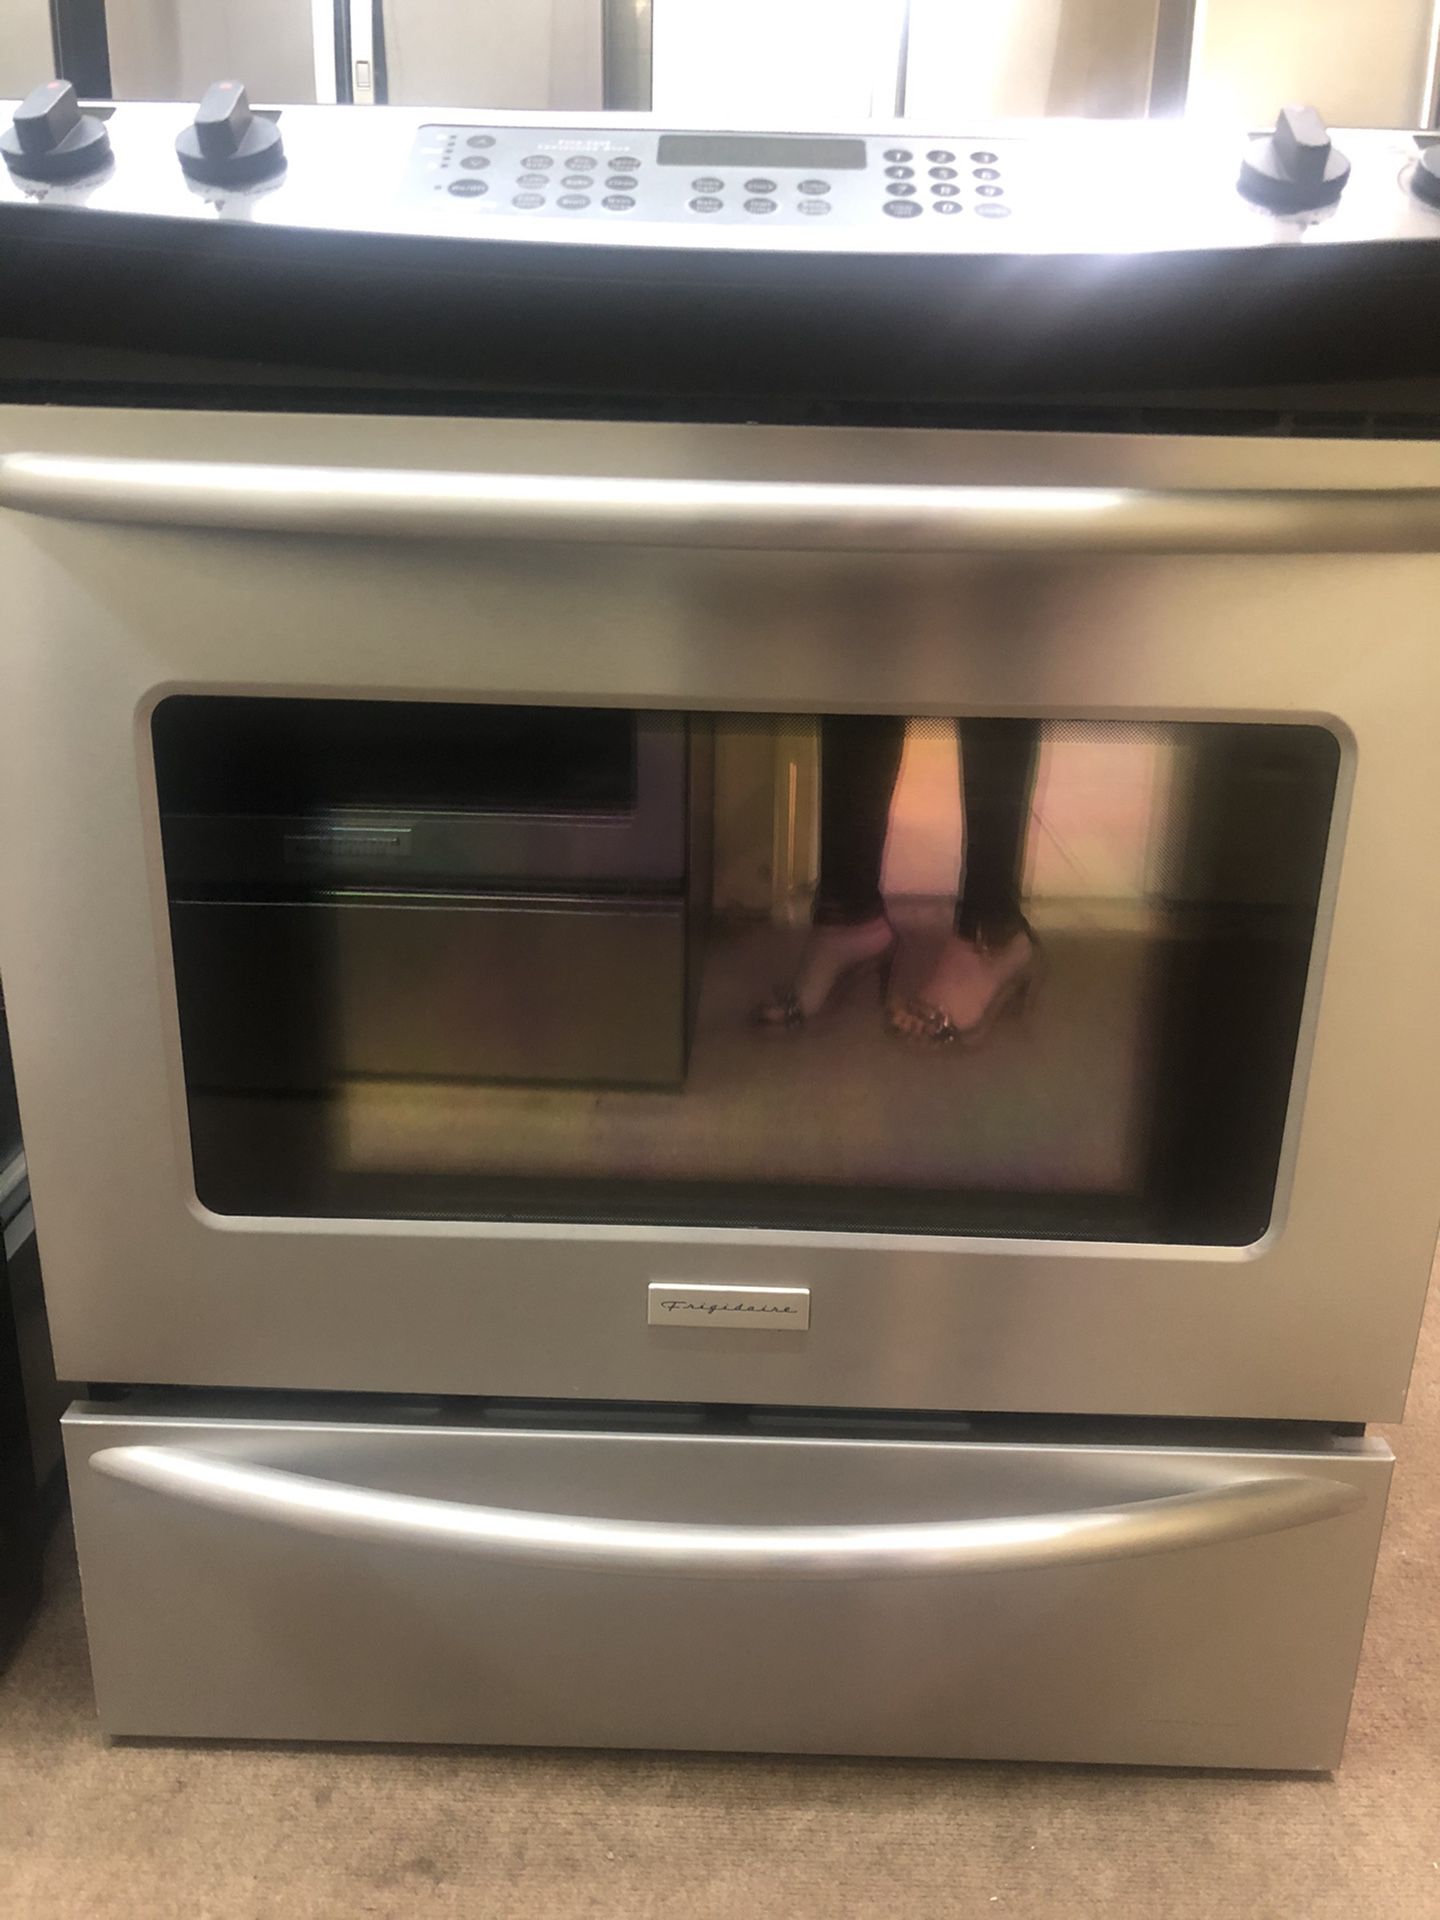 Comfee Stainless Steel Toaster Oven See Photos For More Details And  Dimensions for Sale in Meriden, CT - OfferUp